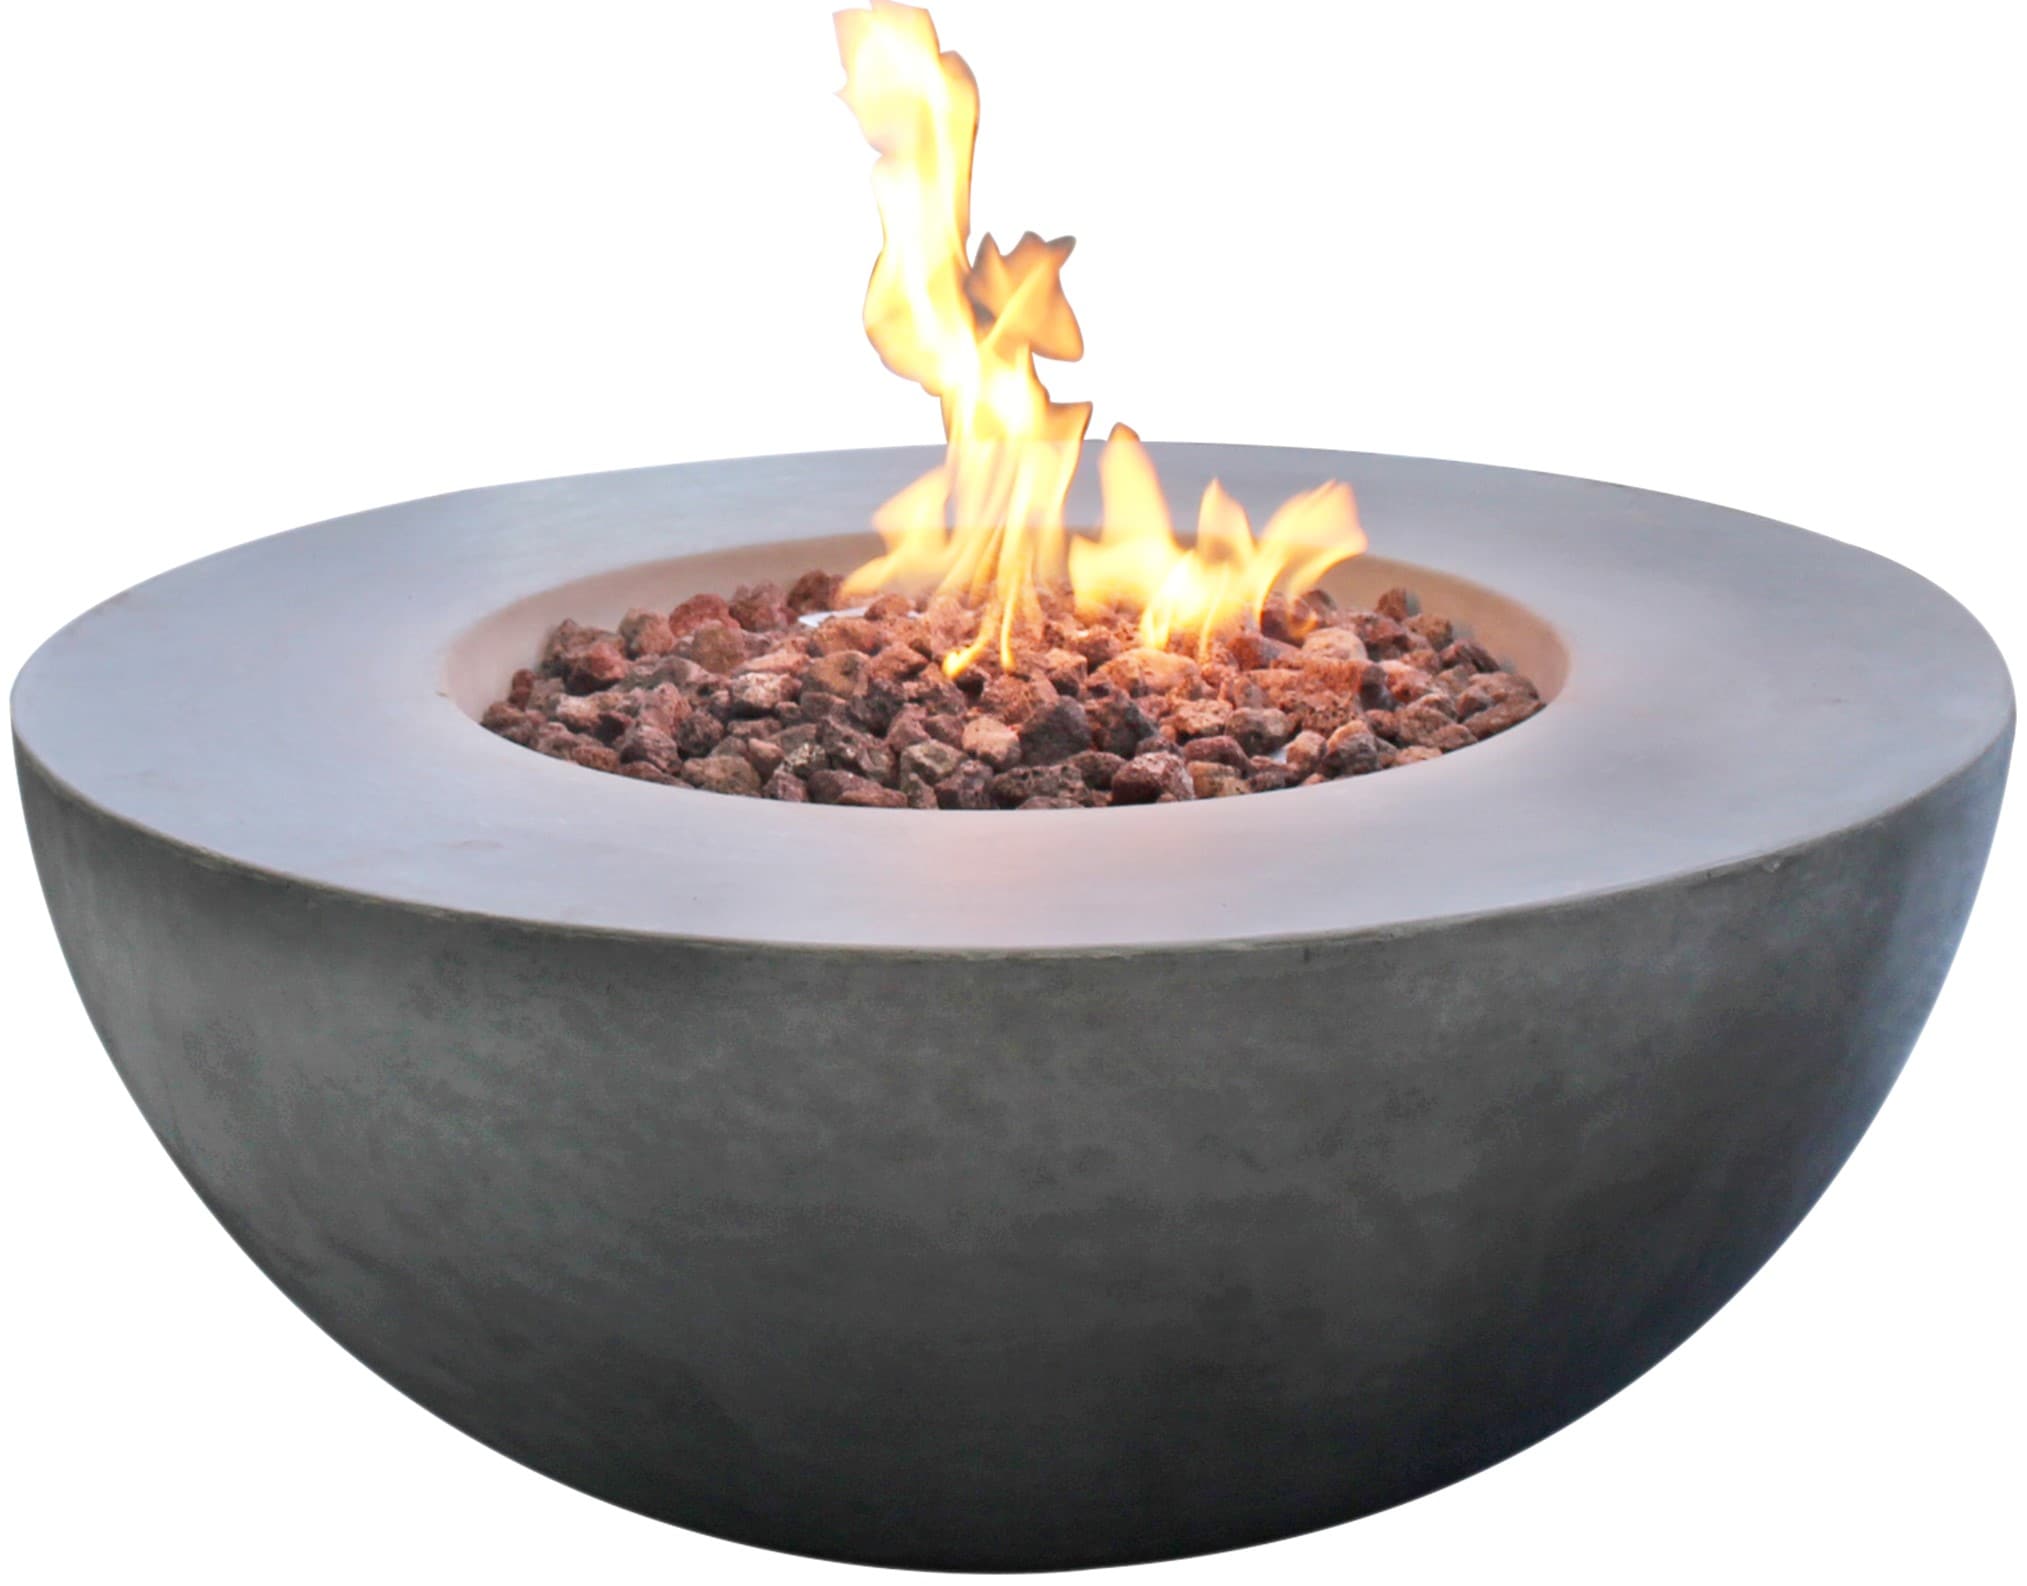 Gas Fire Pits Department At, Tabletop Fire Pit Safety